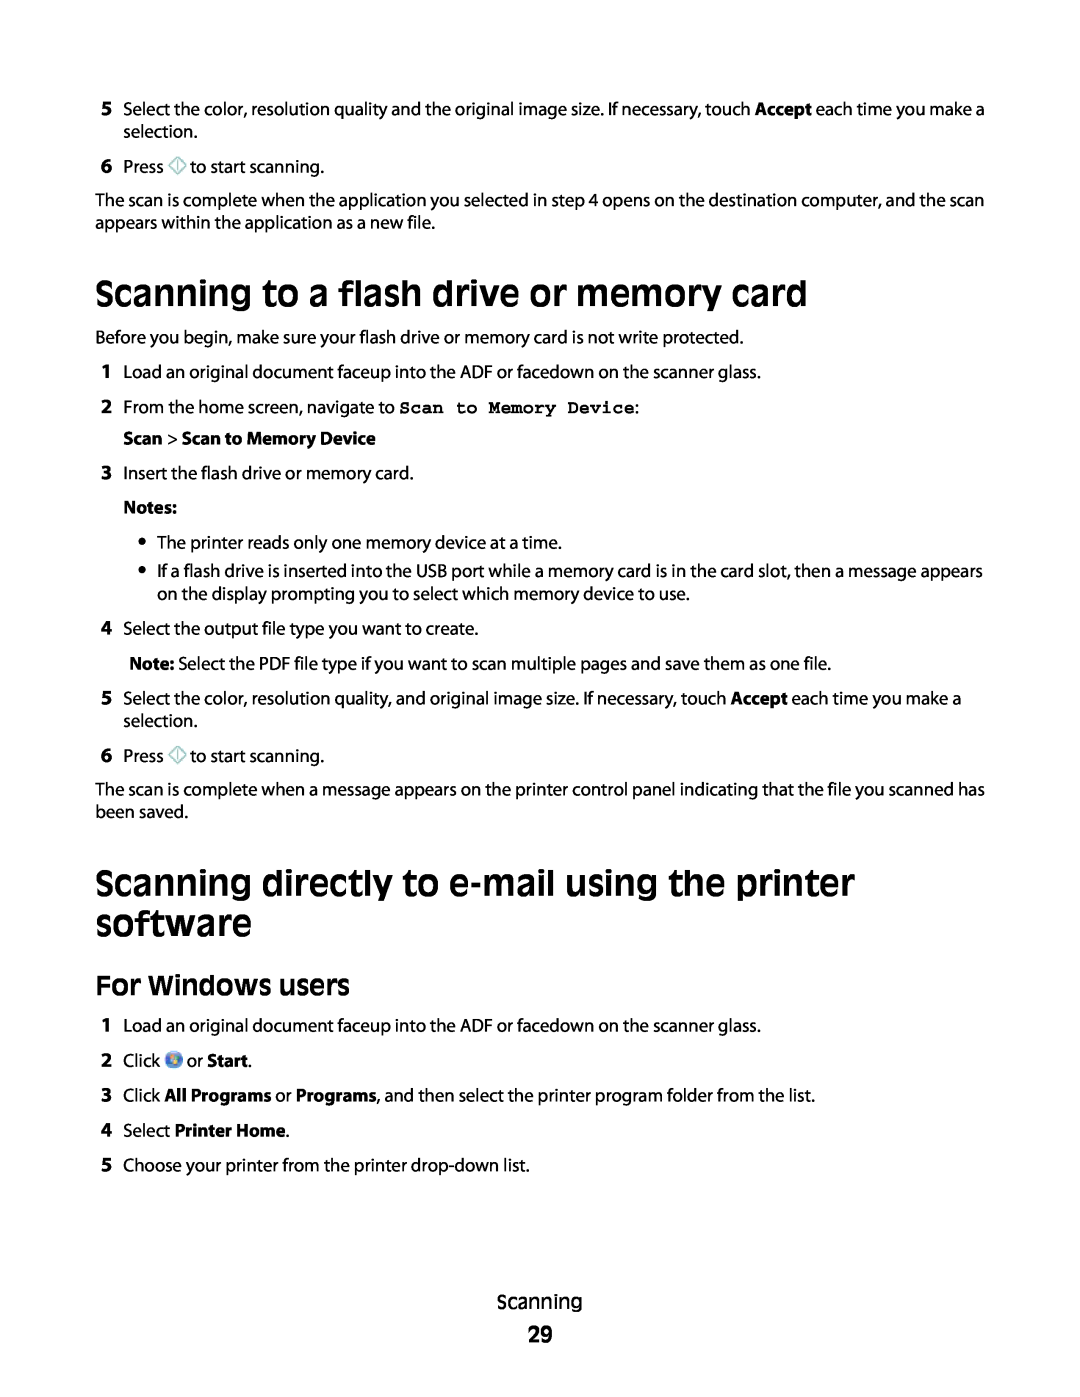 Lexmark Pro800, Pro803 Scanning to a flash drive or memory card, Scanning directly to e-mail using the printer software 